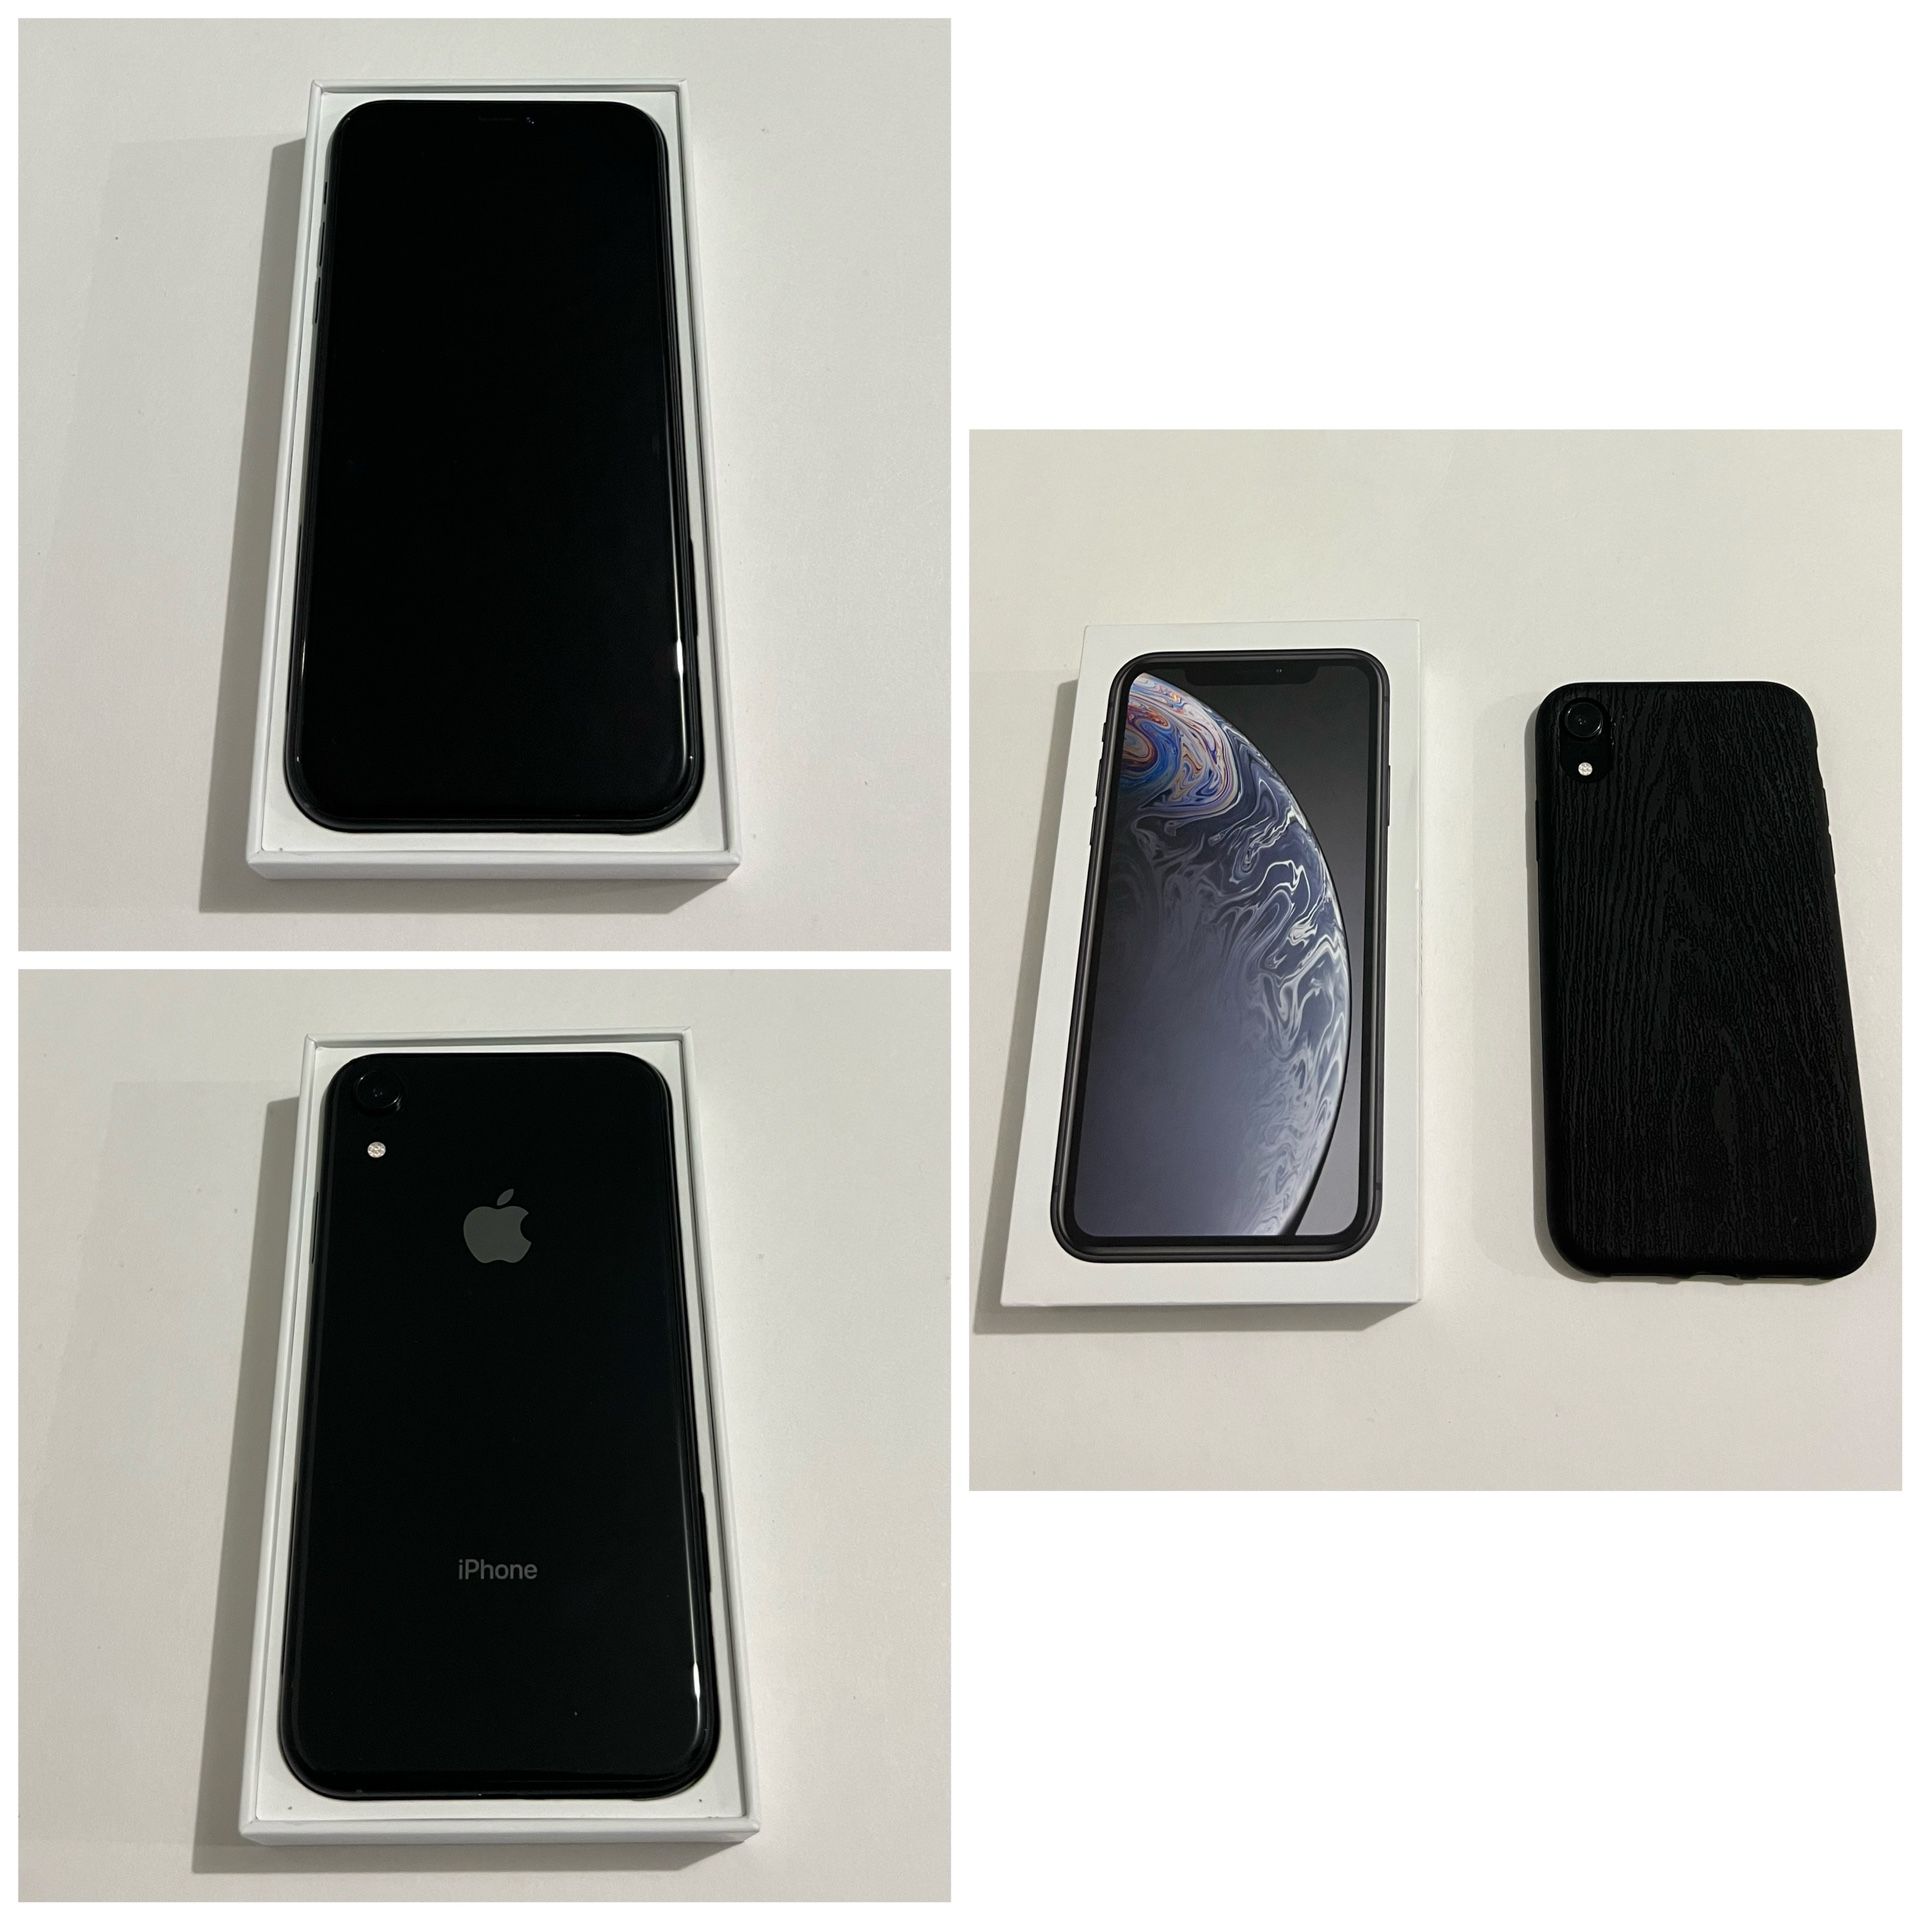 iPhone XR 64GB Black in excellent condition for sale. Comes with the original box, charger and case. Works on Cricket Wireless.   $250